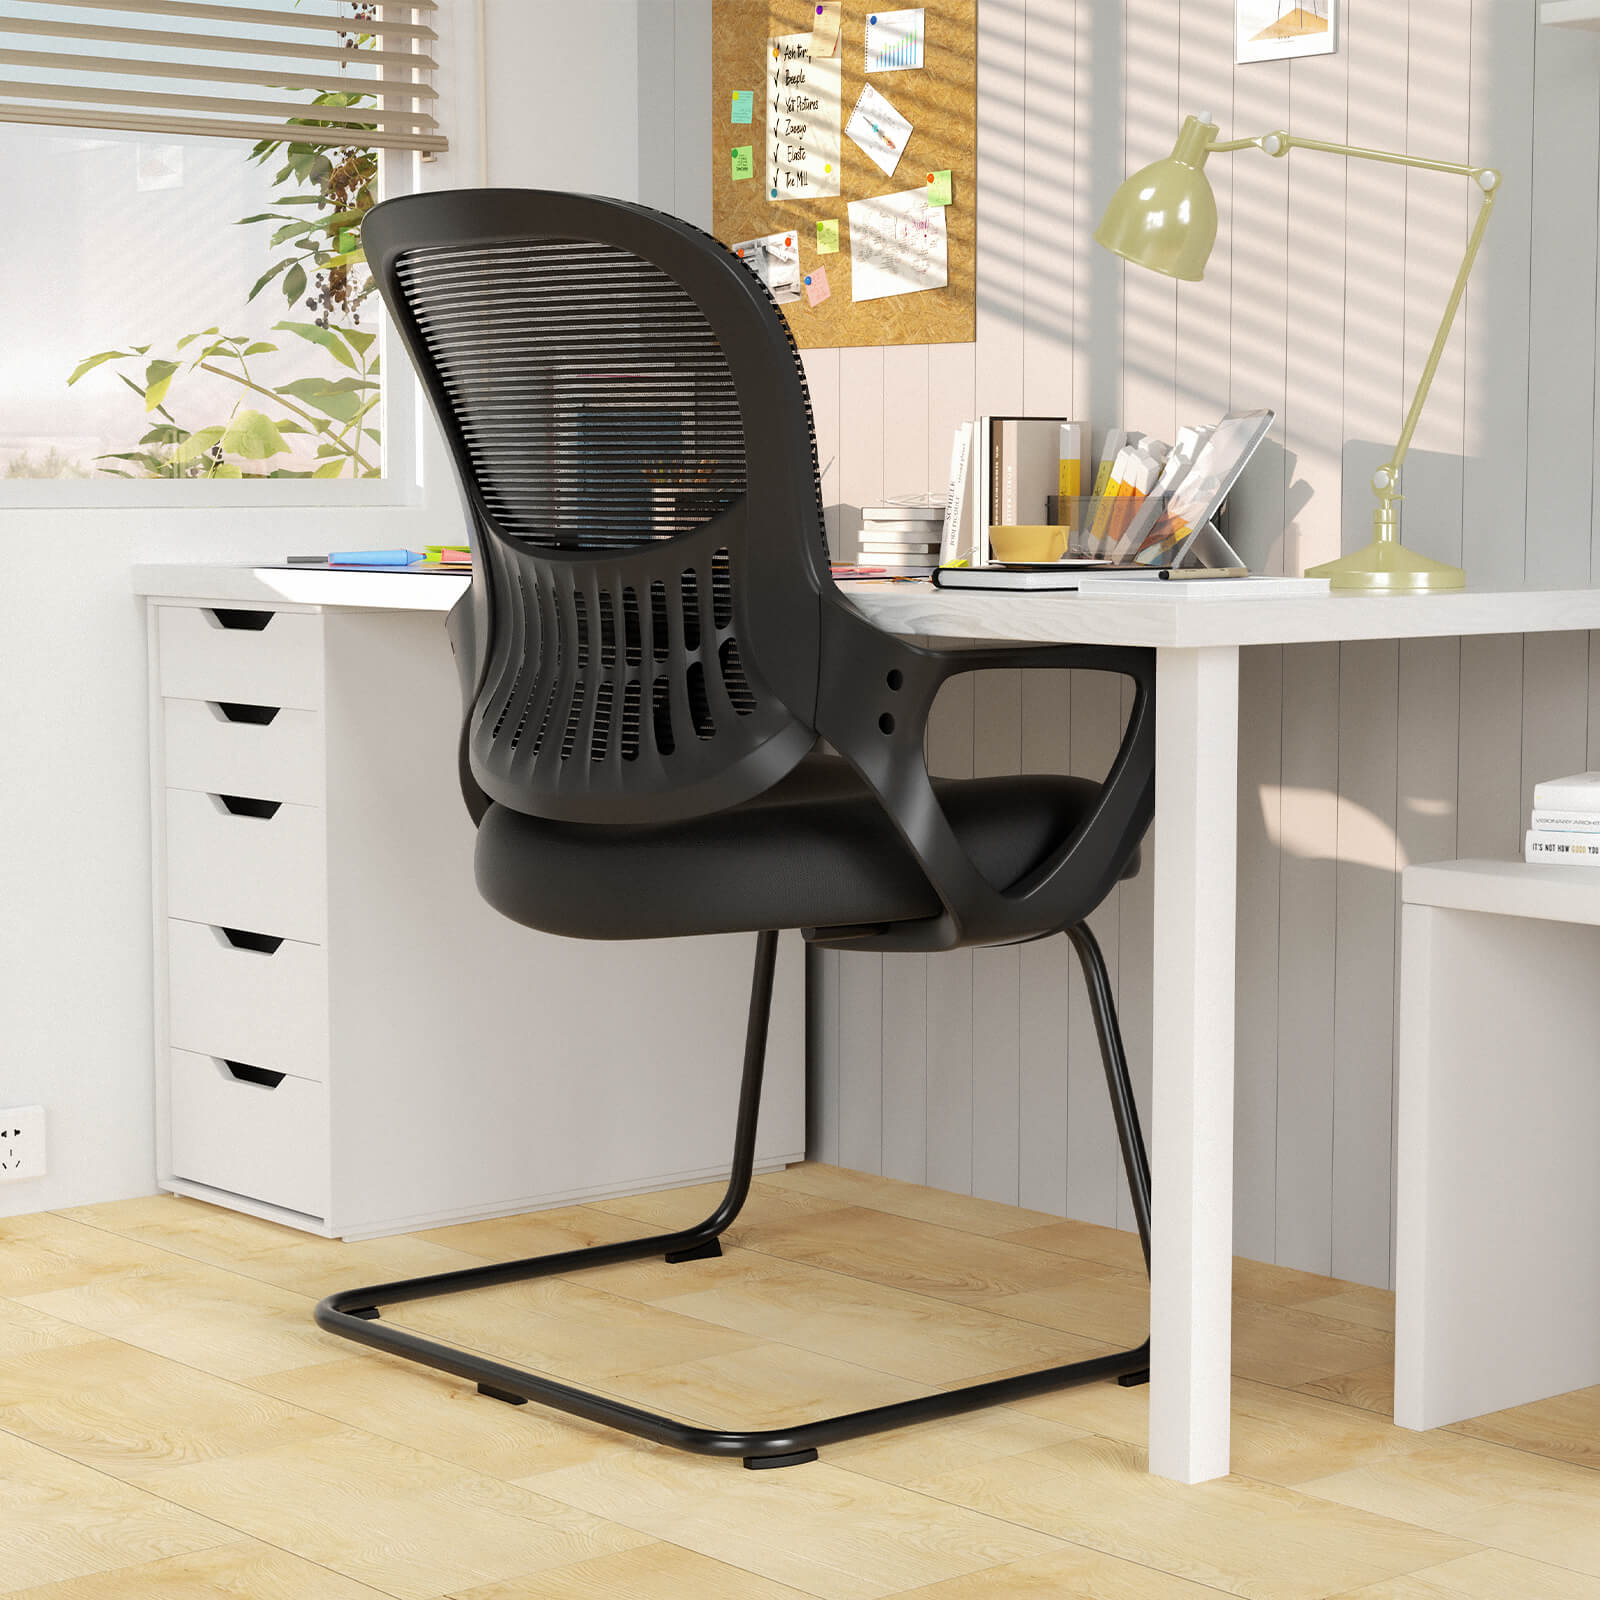 Ergonomic office chair - with storage basket, no wheels, breathable back, suitable for office, bedroom, living room.